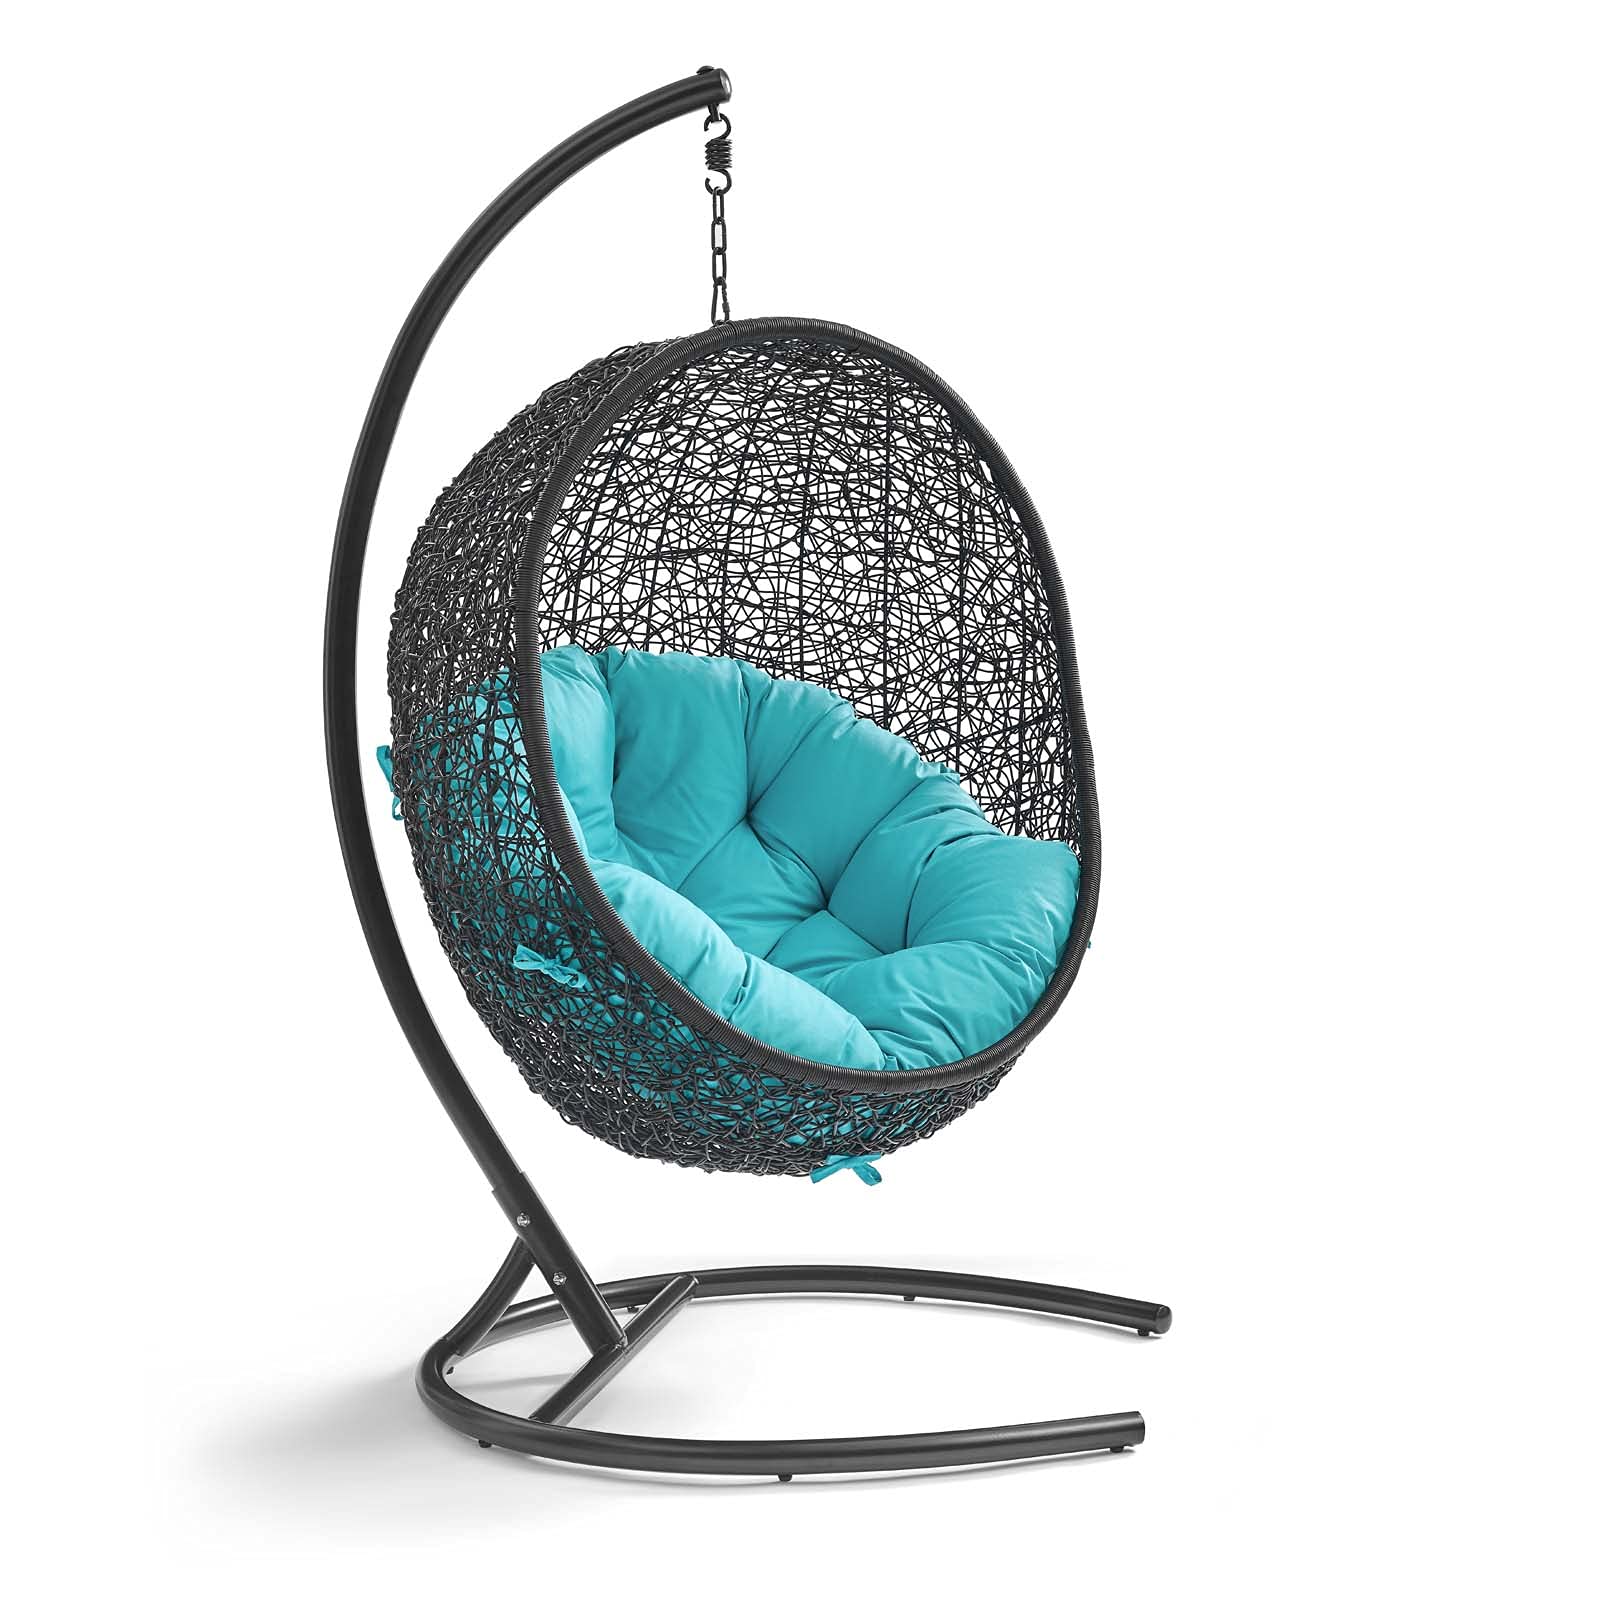 Modway EEI-739-TRQ-SET Encase Wicker Rattan Outdoor Patio Porch Lounge Egg, Swing Chair with Stand, Turquoise